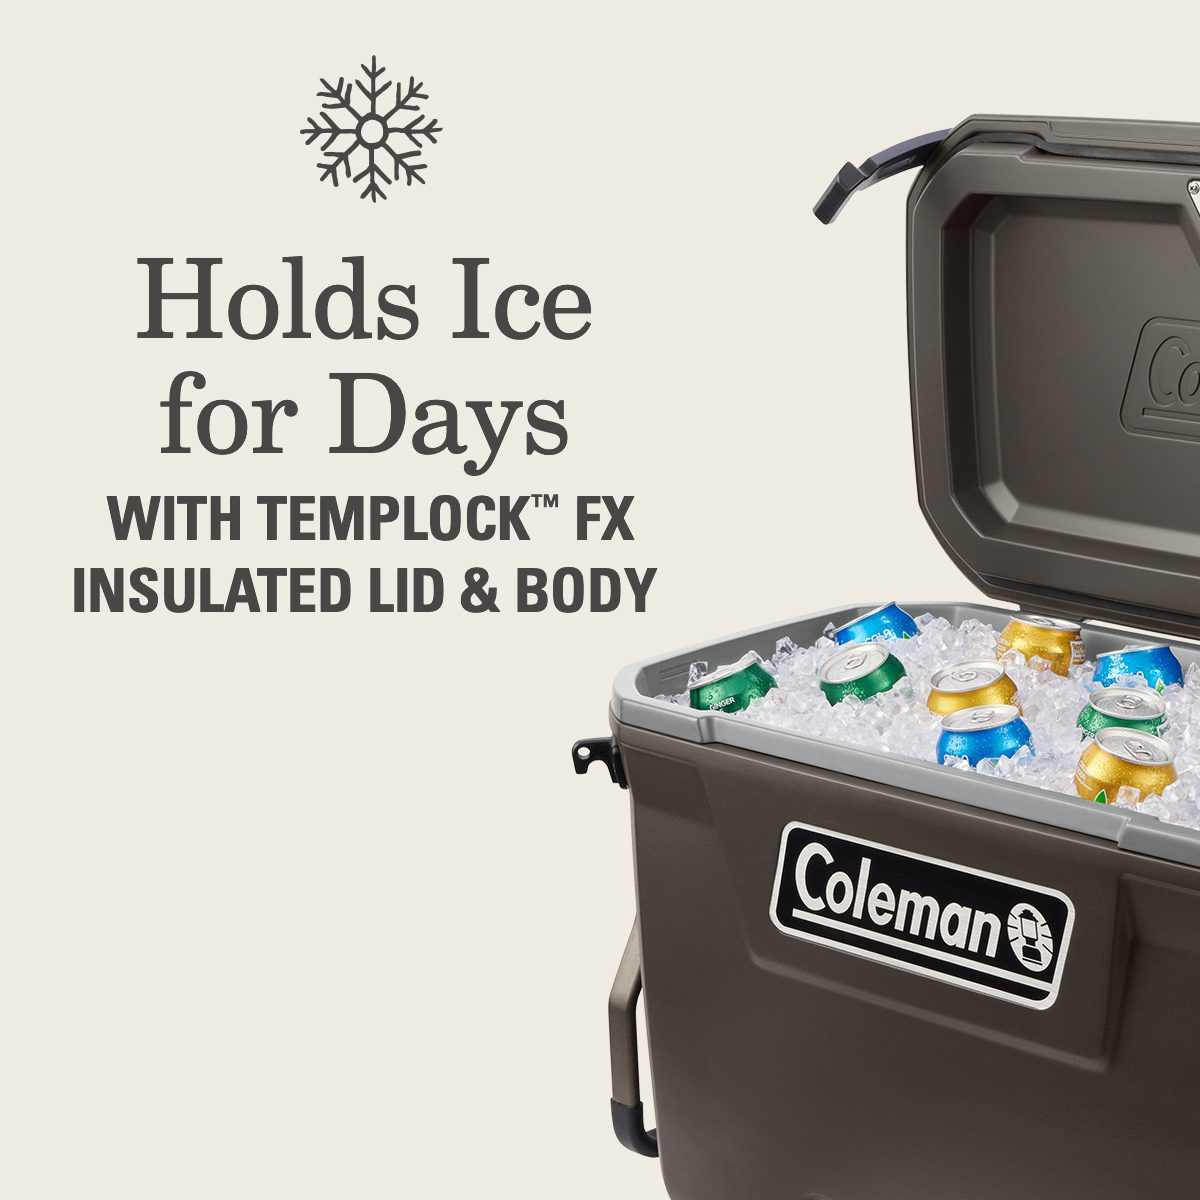 Coleman Convoy Series 65-Quart Hard Cooler with Wheels, up to 48 Cans, Brown Walnut Color - image 3 of 11